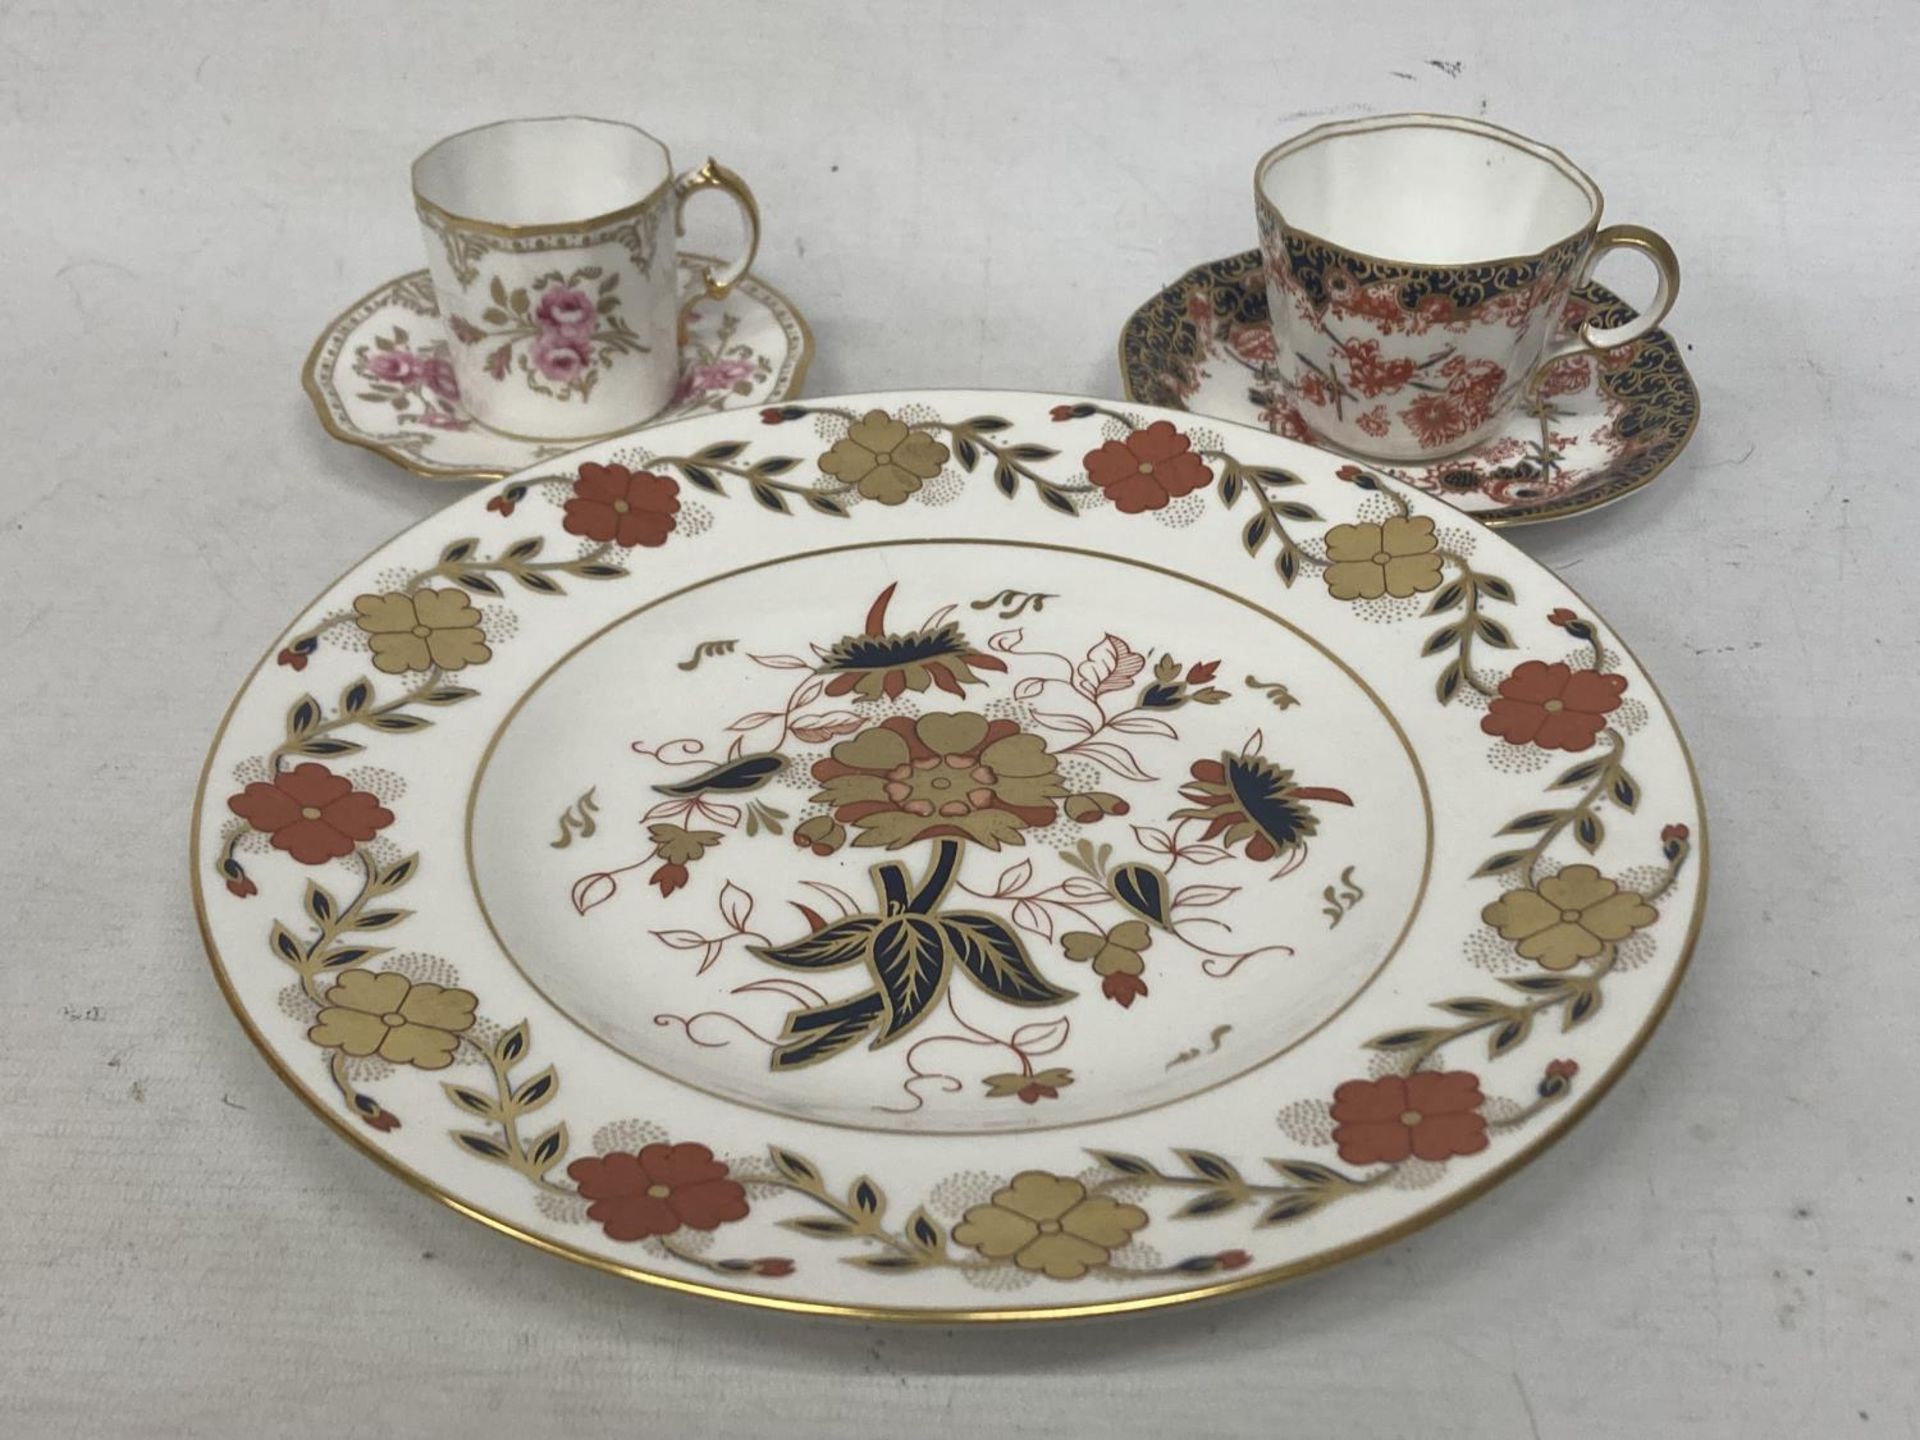 A ROYAL CROWN DERBY PINXTON ROSES COFFEE CAN AND SAUCER TOGETHER WITH A ROYAL CROWN DERBY TEACUP AND